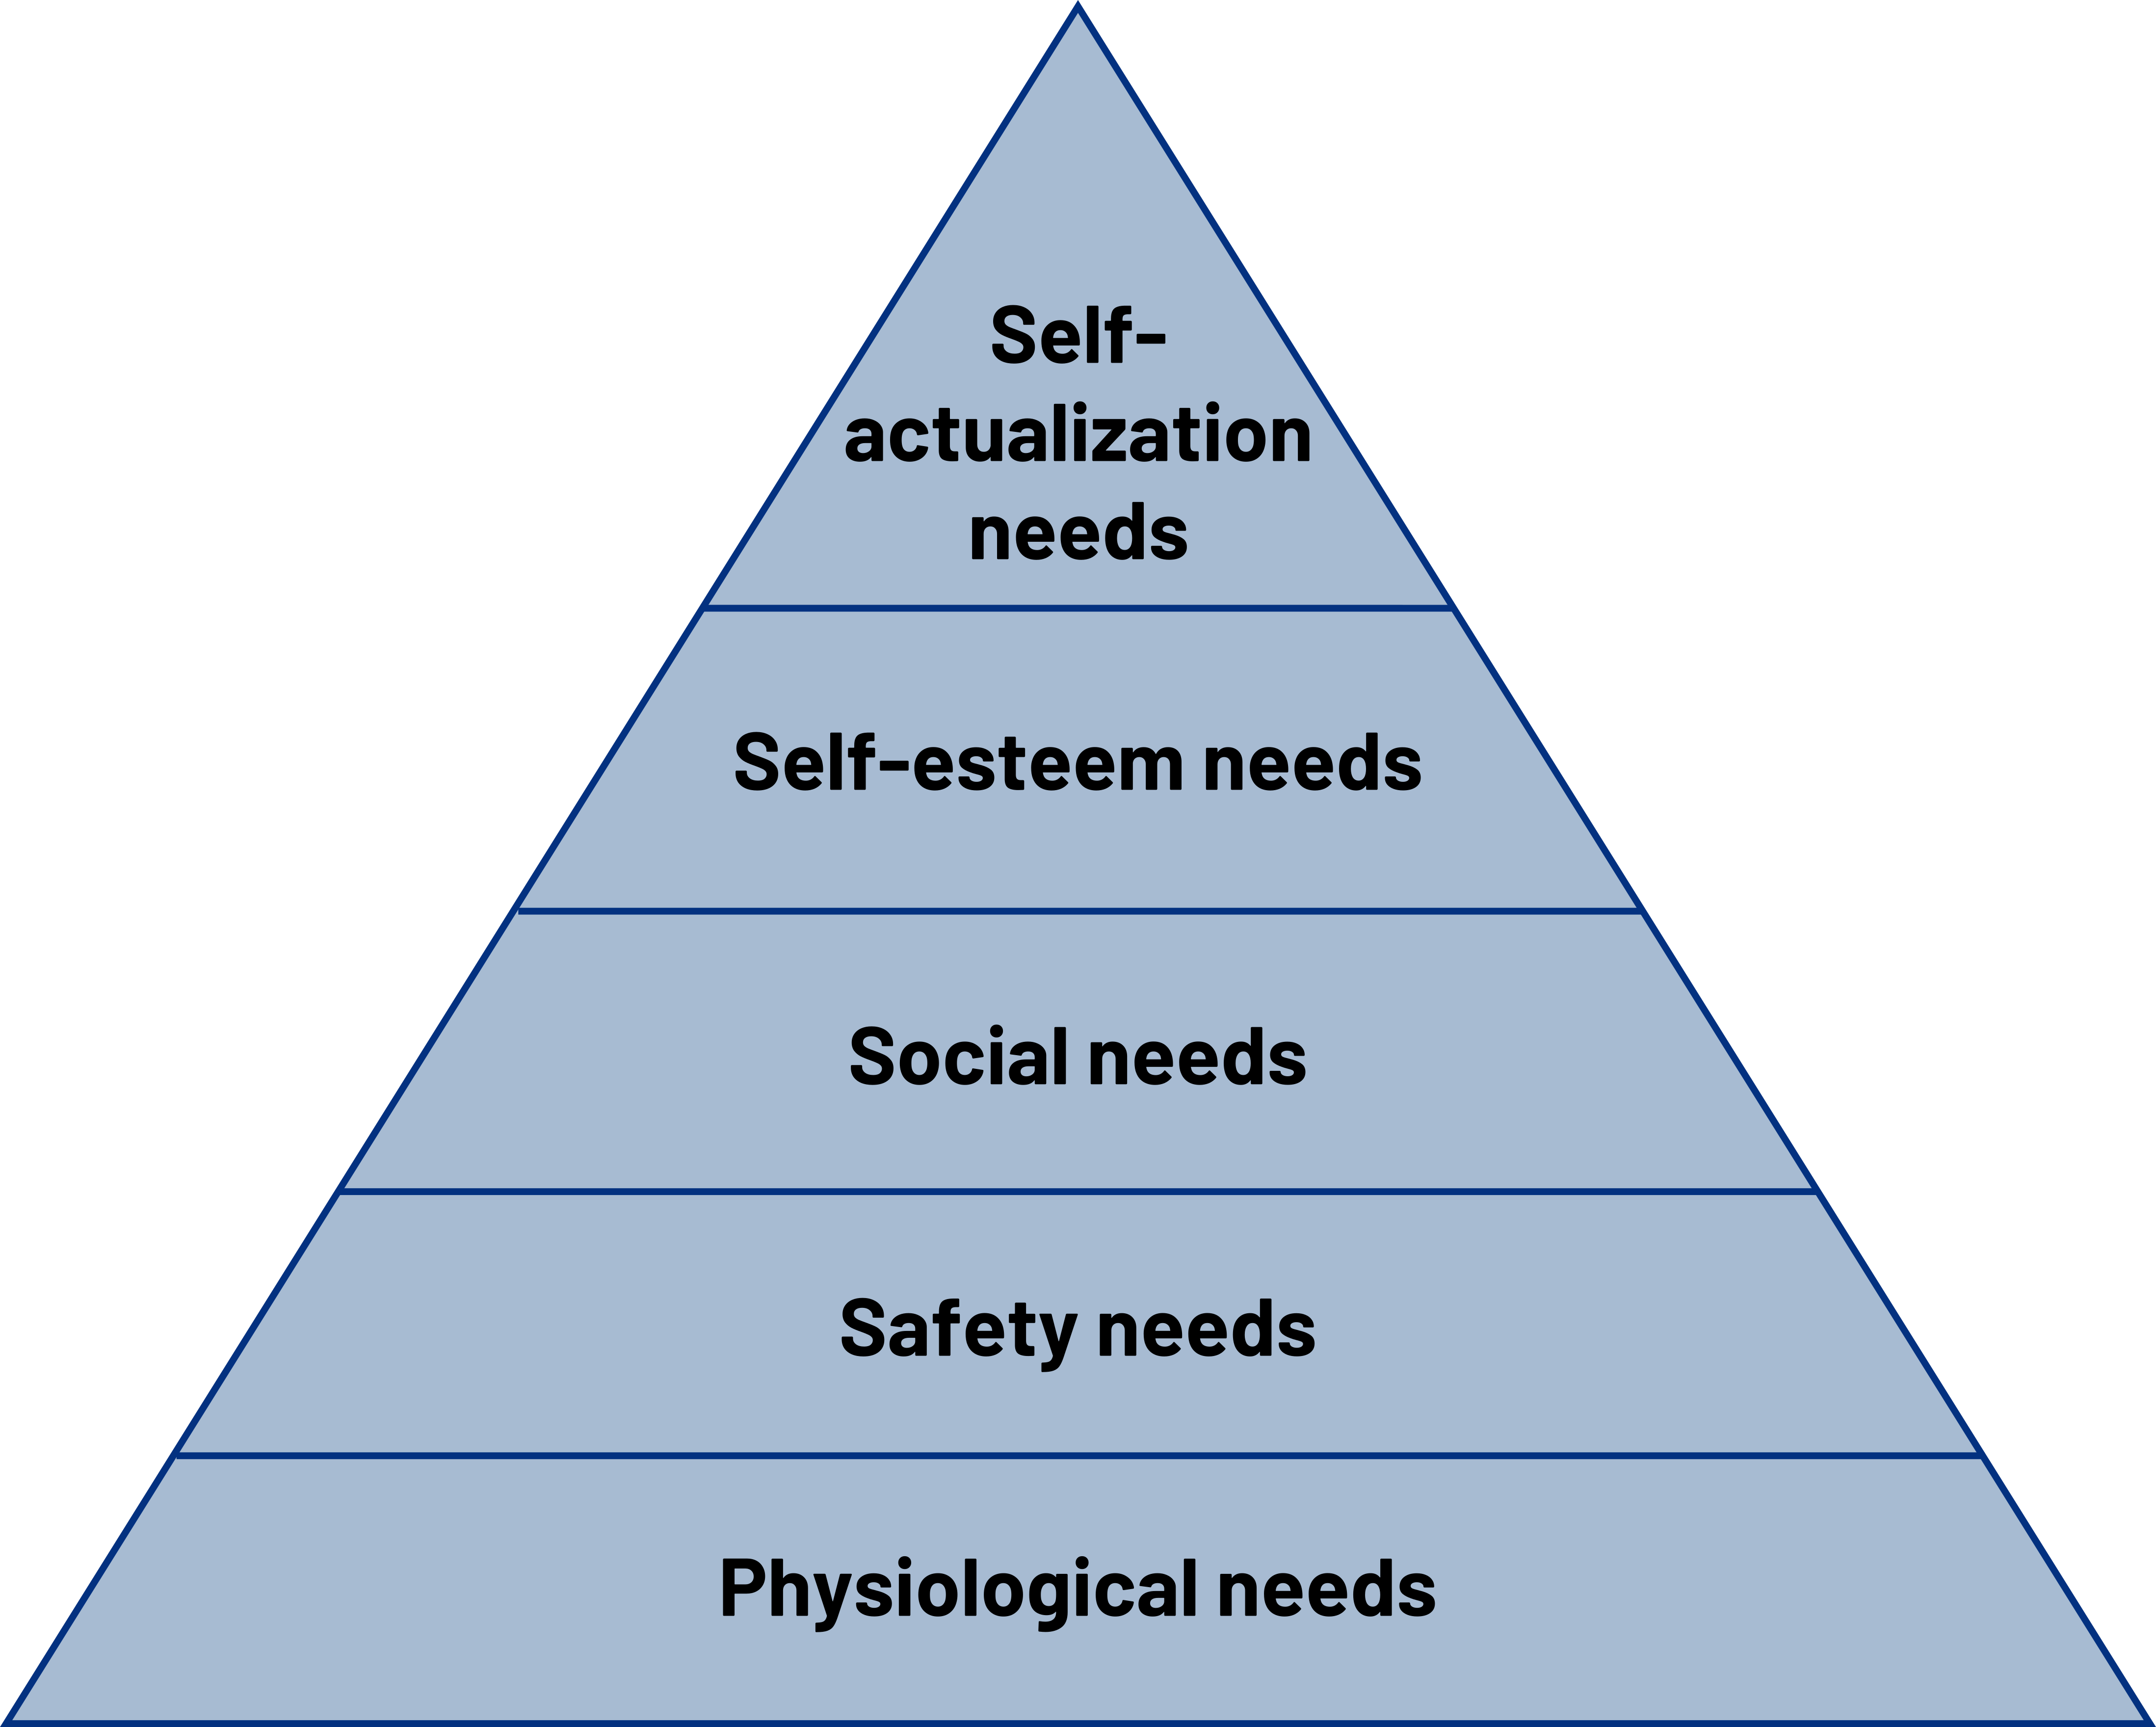 Triangle with 5 horizontal sections, narrowing as it gets to the top. From bottom to top: Physiological needs, safety needs, social needs, self-esteem needs, self-actualization needs